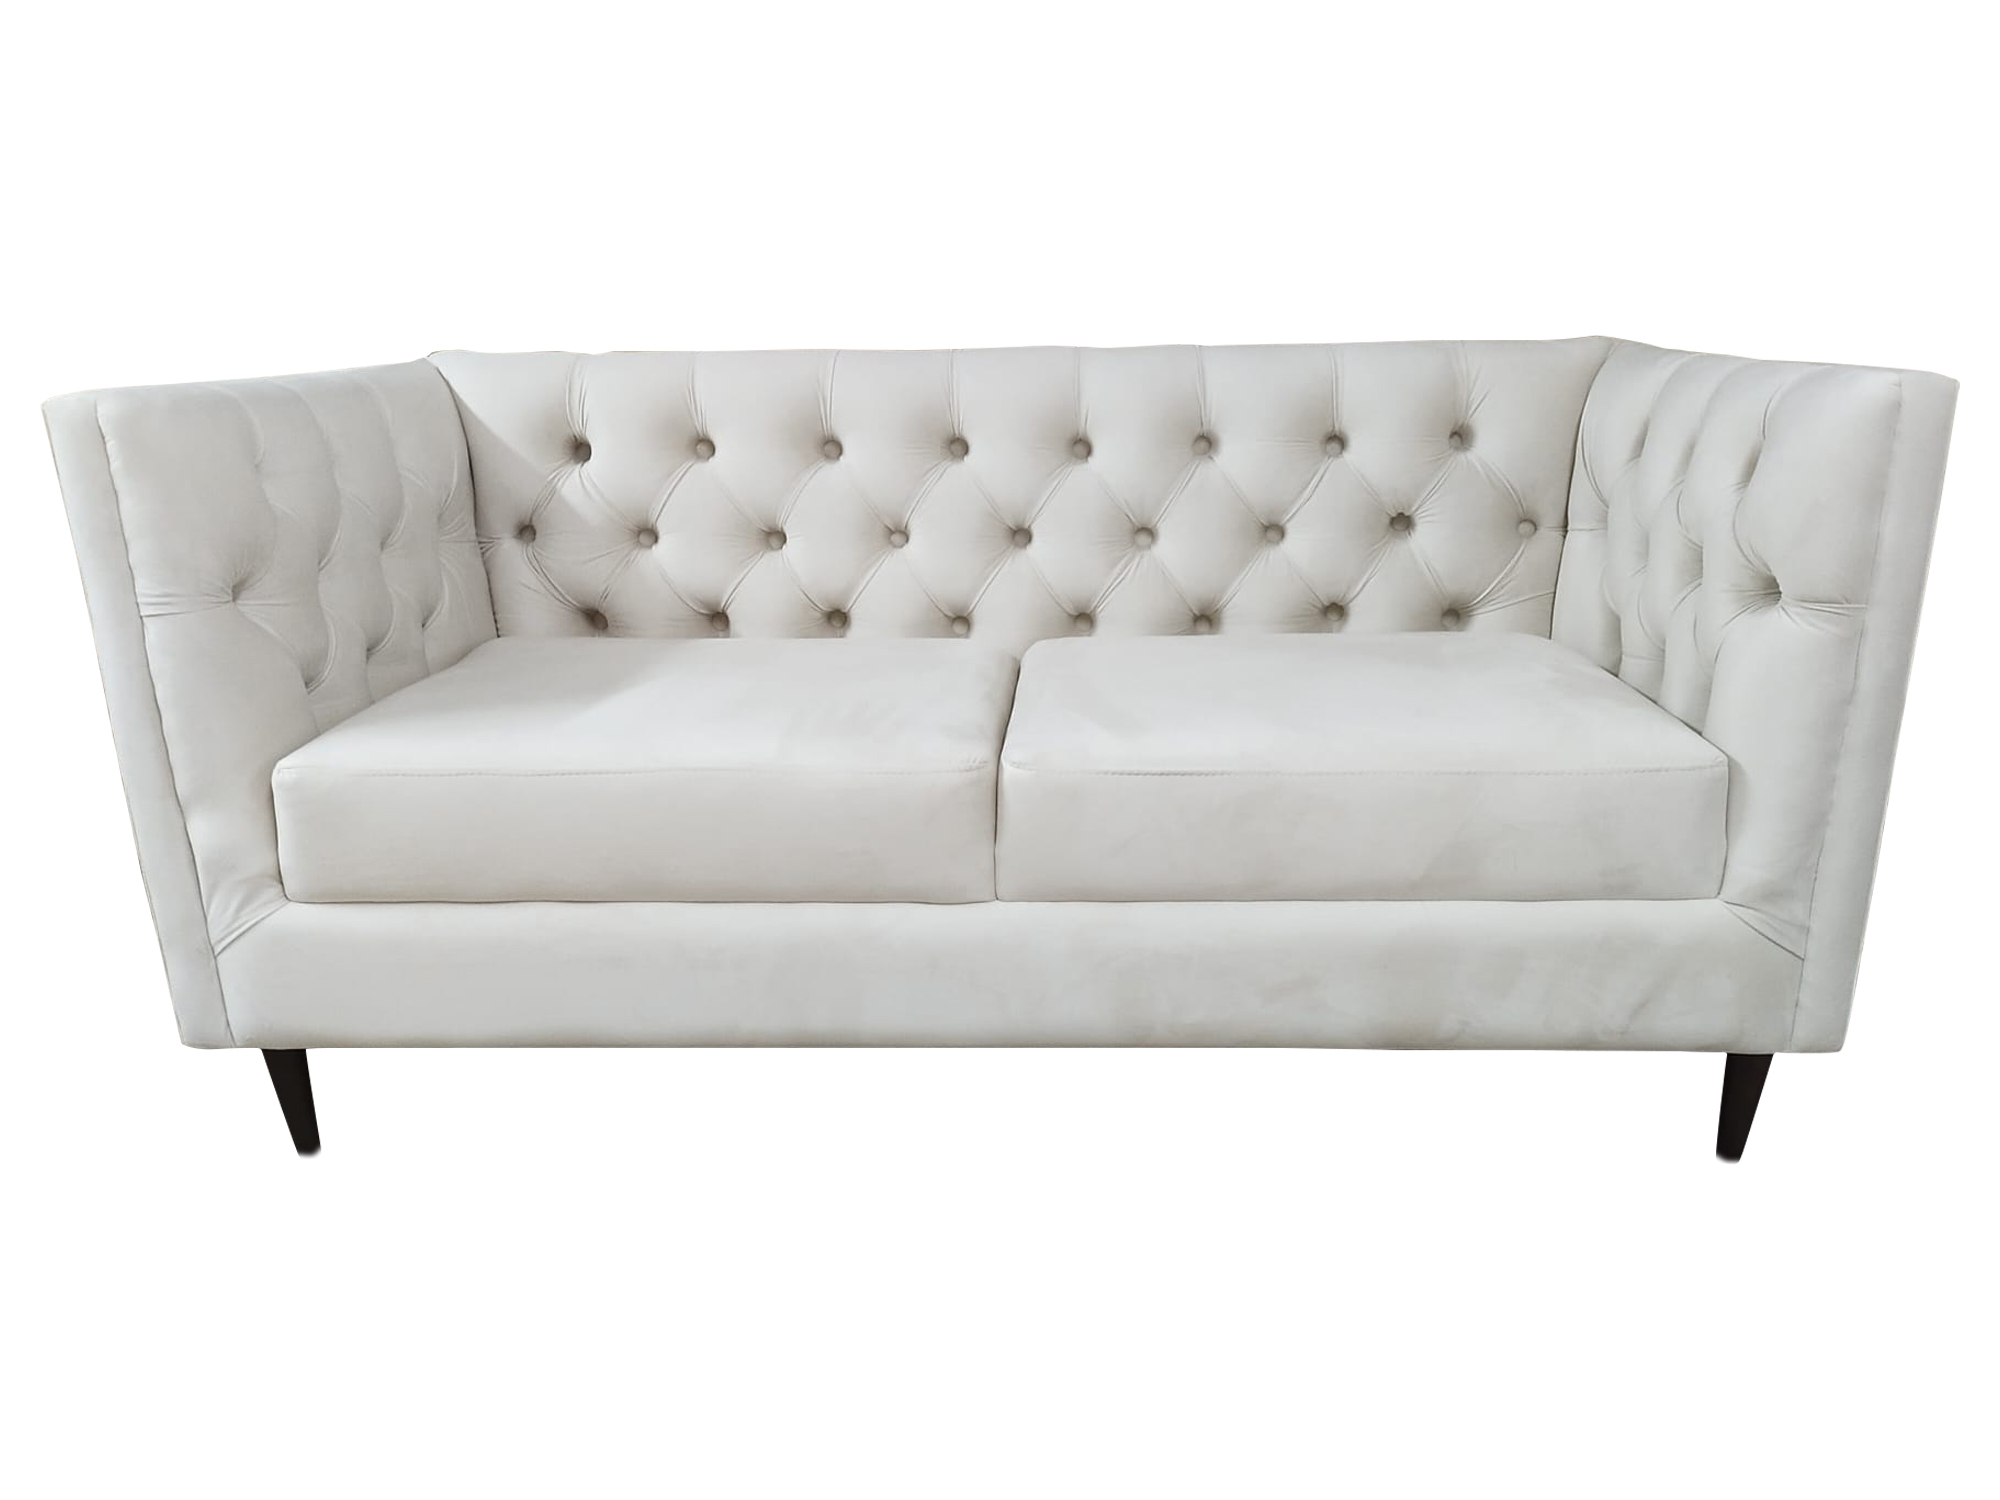 Luxury Sofa 3 Seater Design Chesterfield Luxury Couches 230cm Furniture Sofas